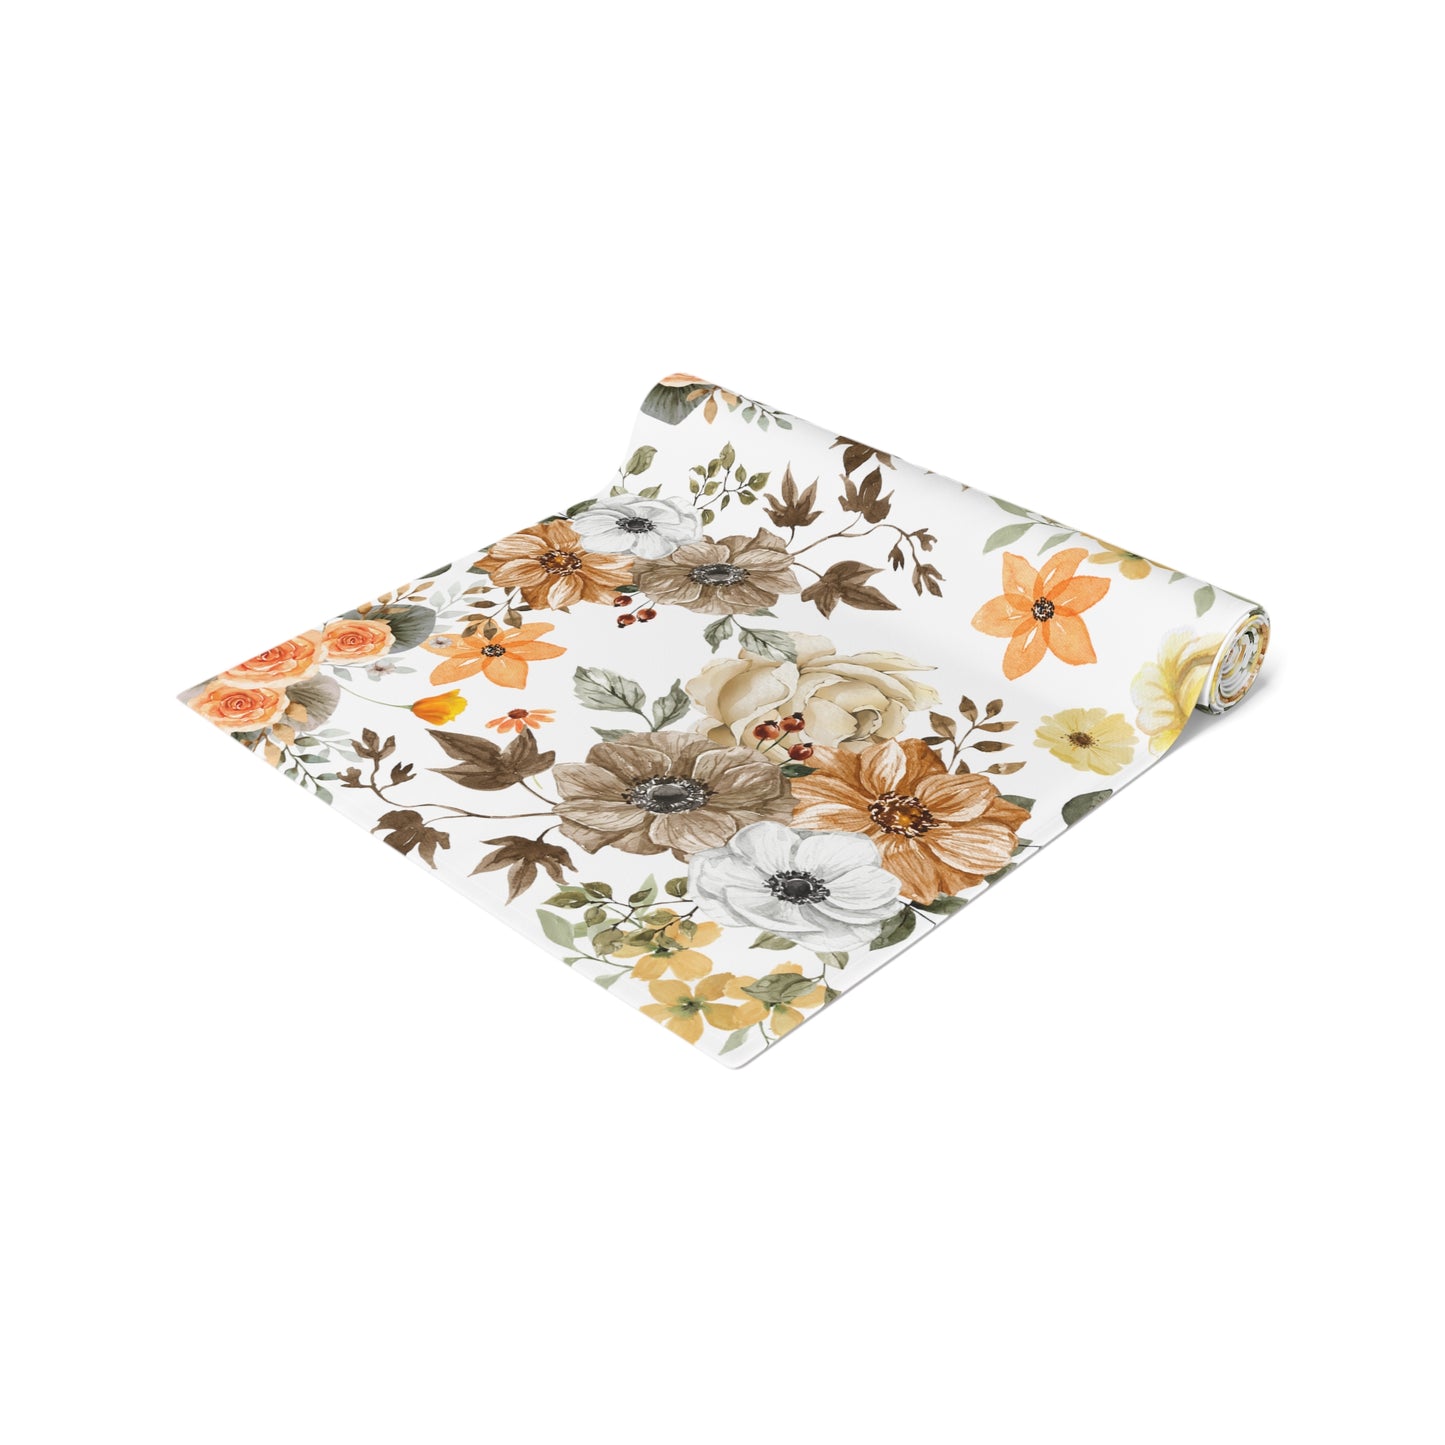 Fall Floral Table Runner